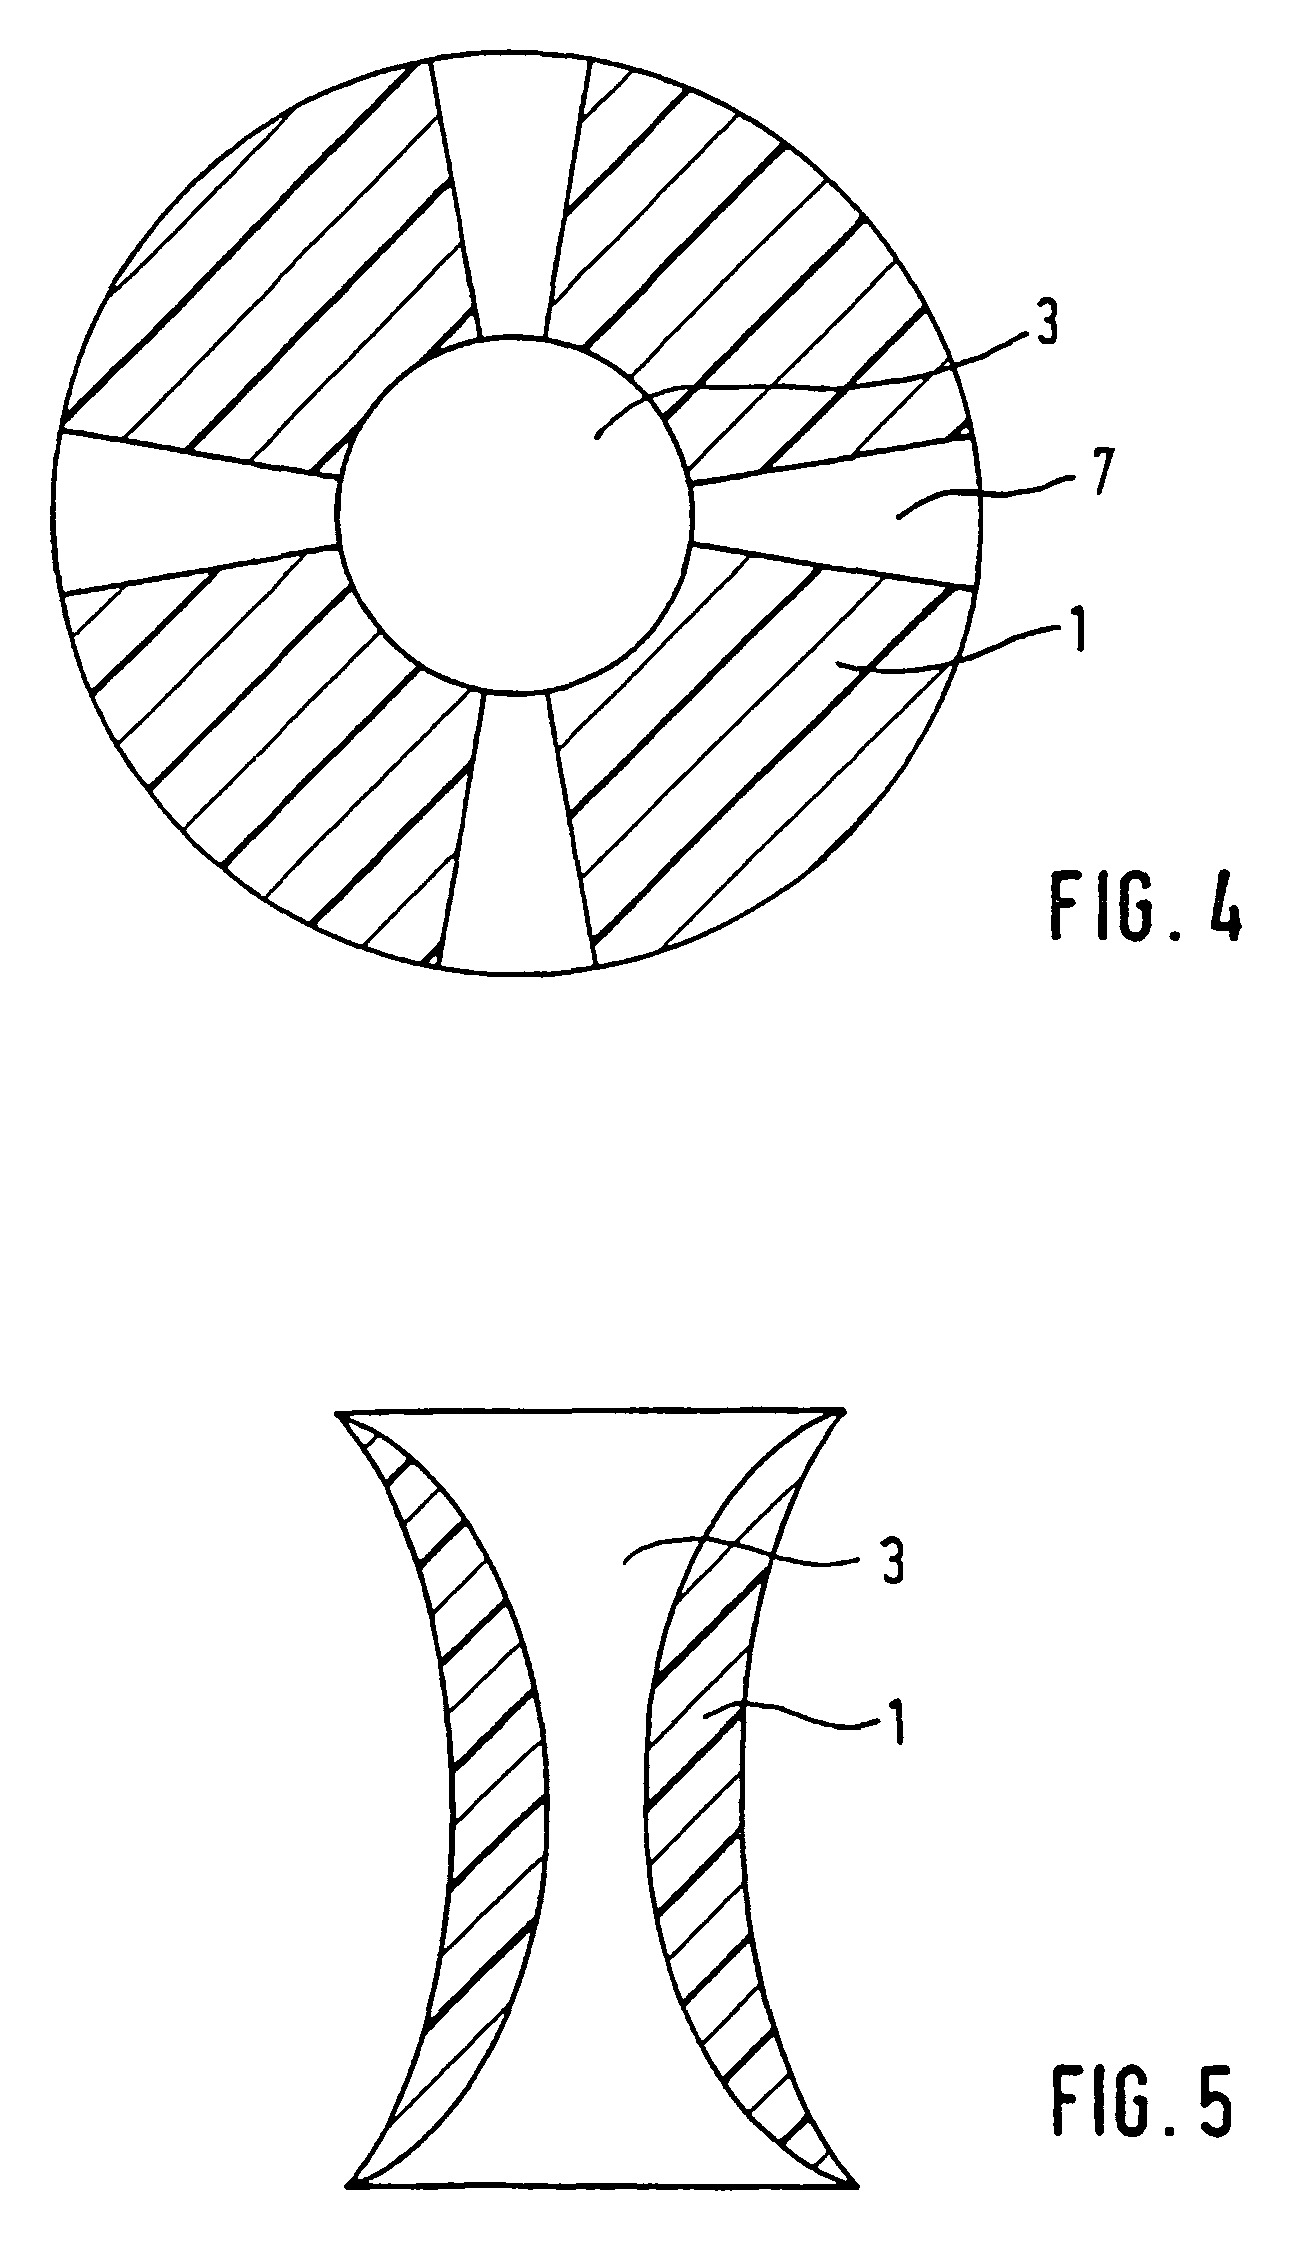 Spacing device for releasing active substances in the paranasal sinus